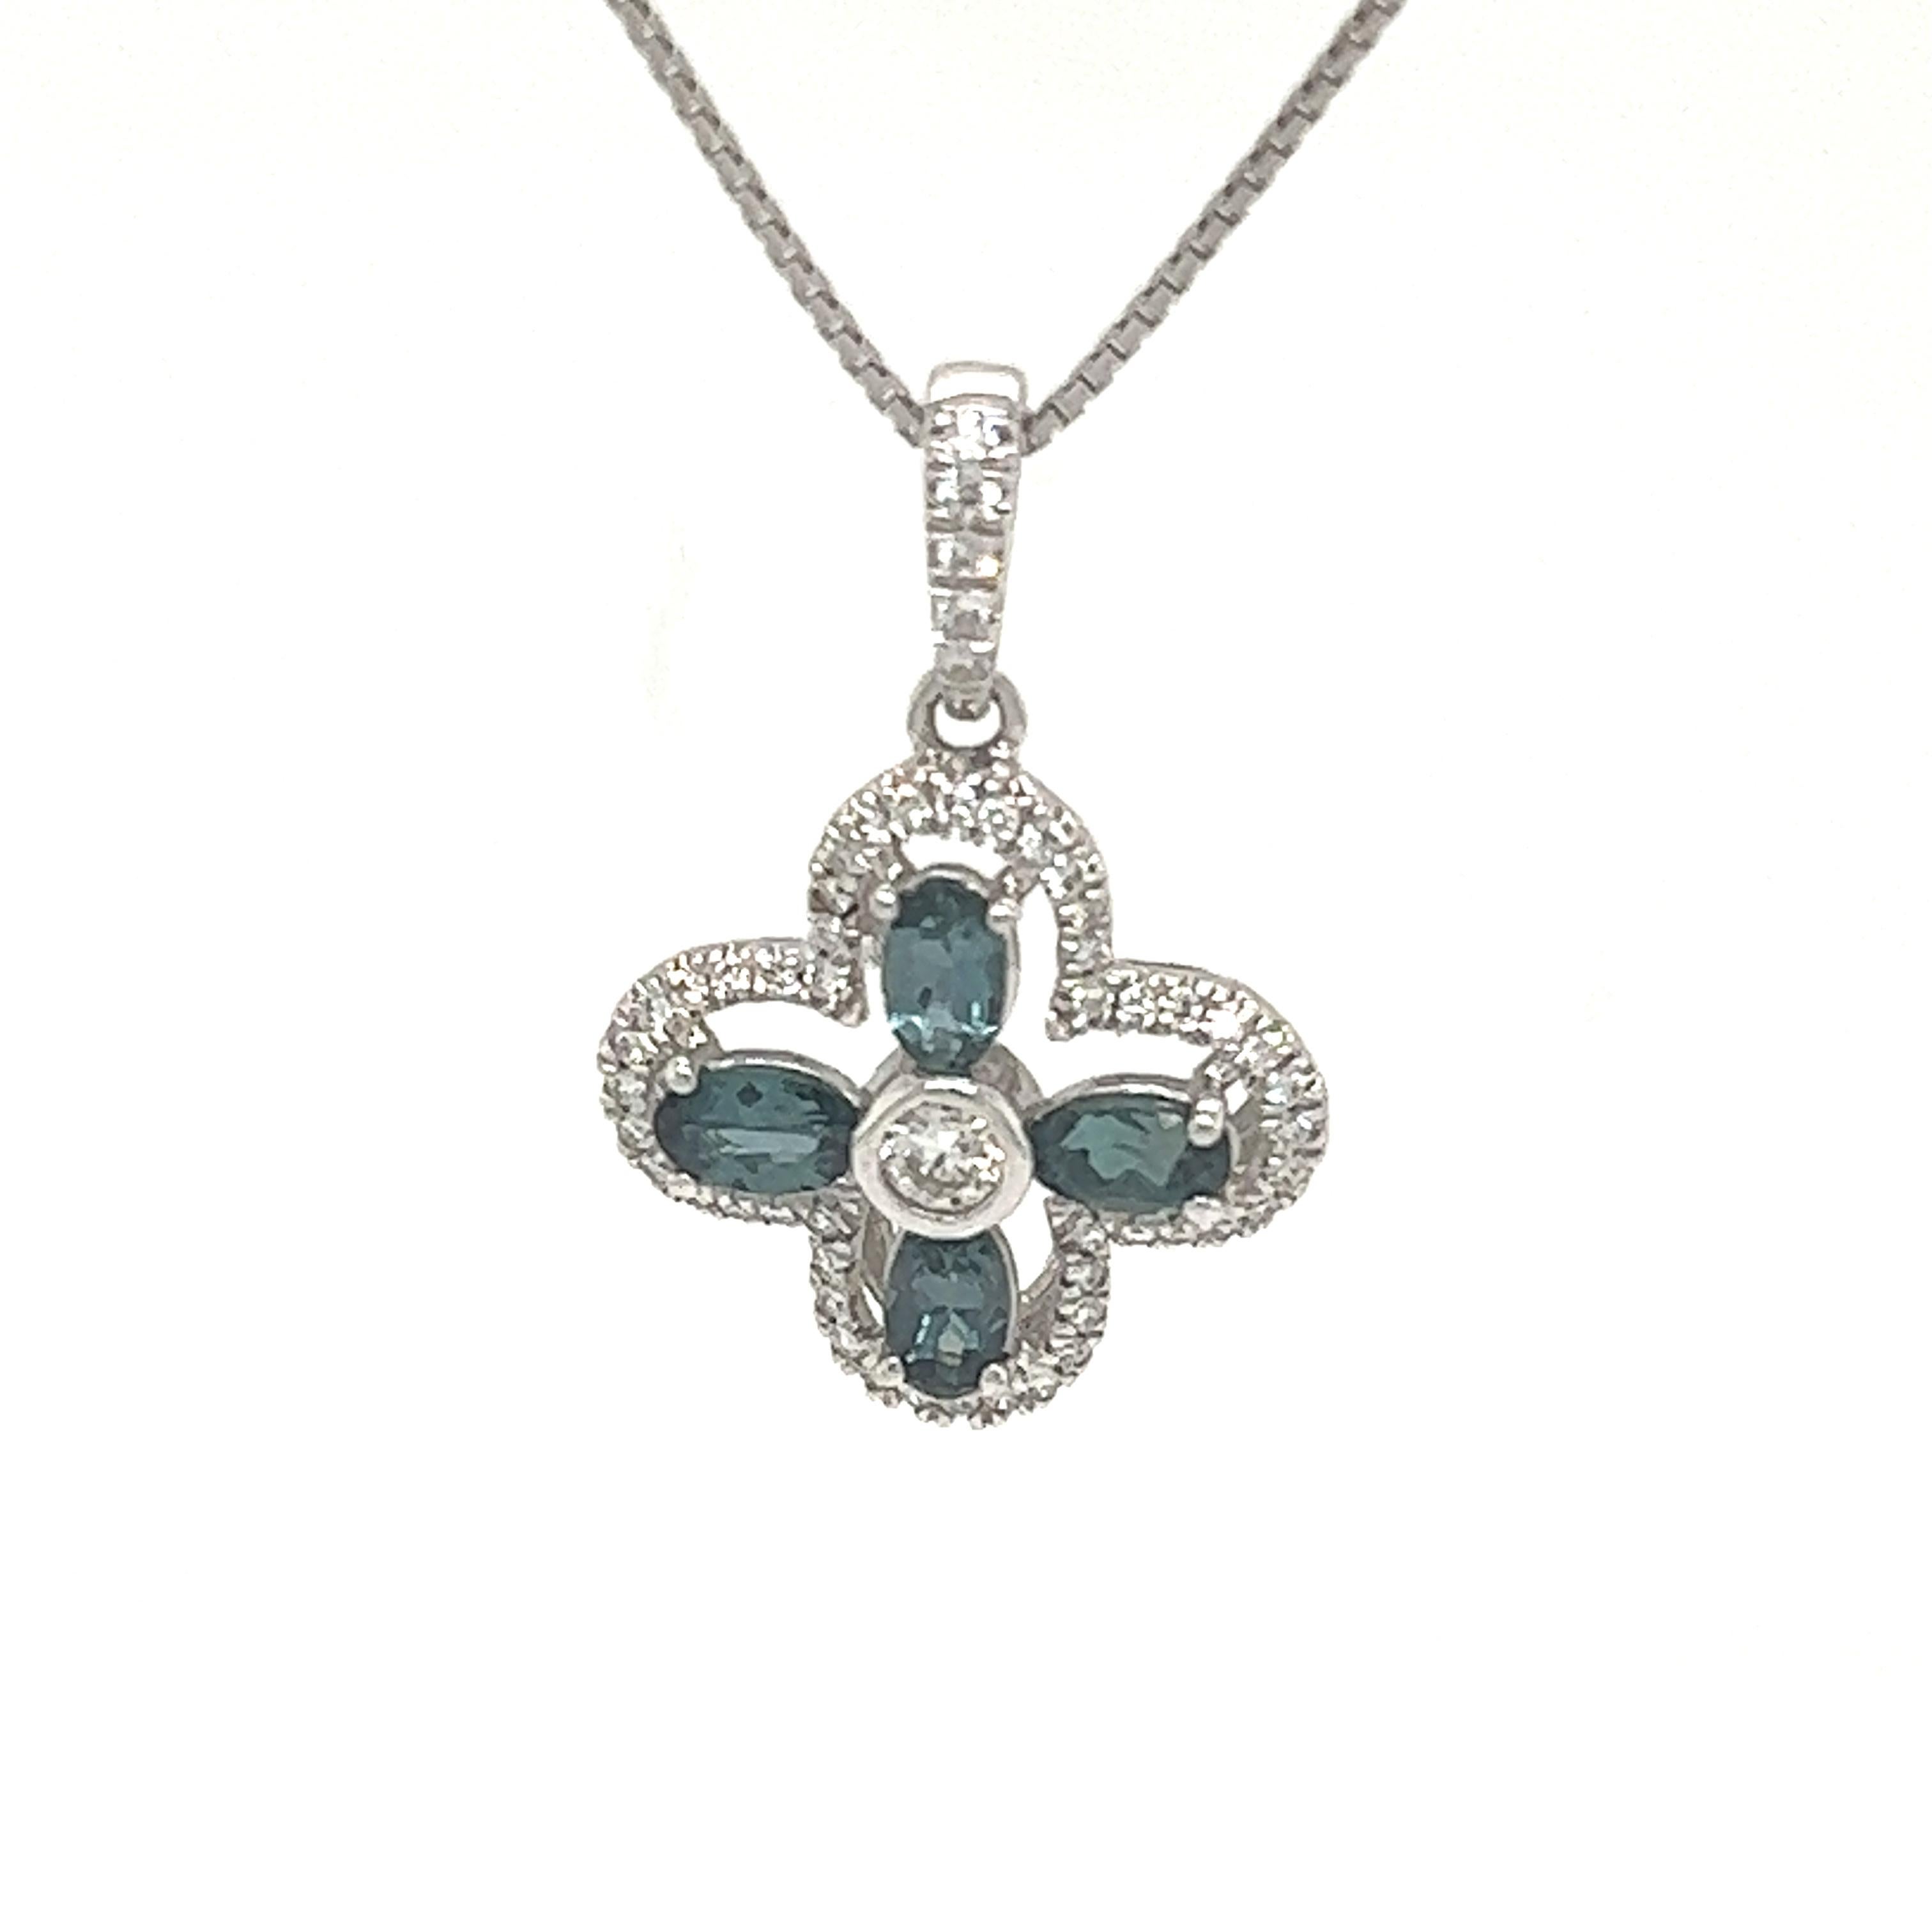 This is an exceptional natural oval-shaped alexandrite and diamond pendant set in solid 14K white gold. The fancy 6X5MM Alexandrite has an excellent green color and is surrounded by a halo of round-cut white diamonds. The pendant is stamped 14K and